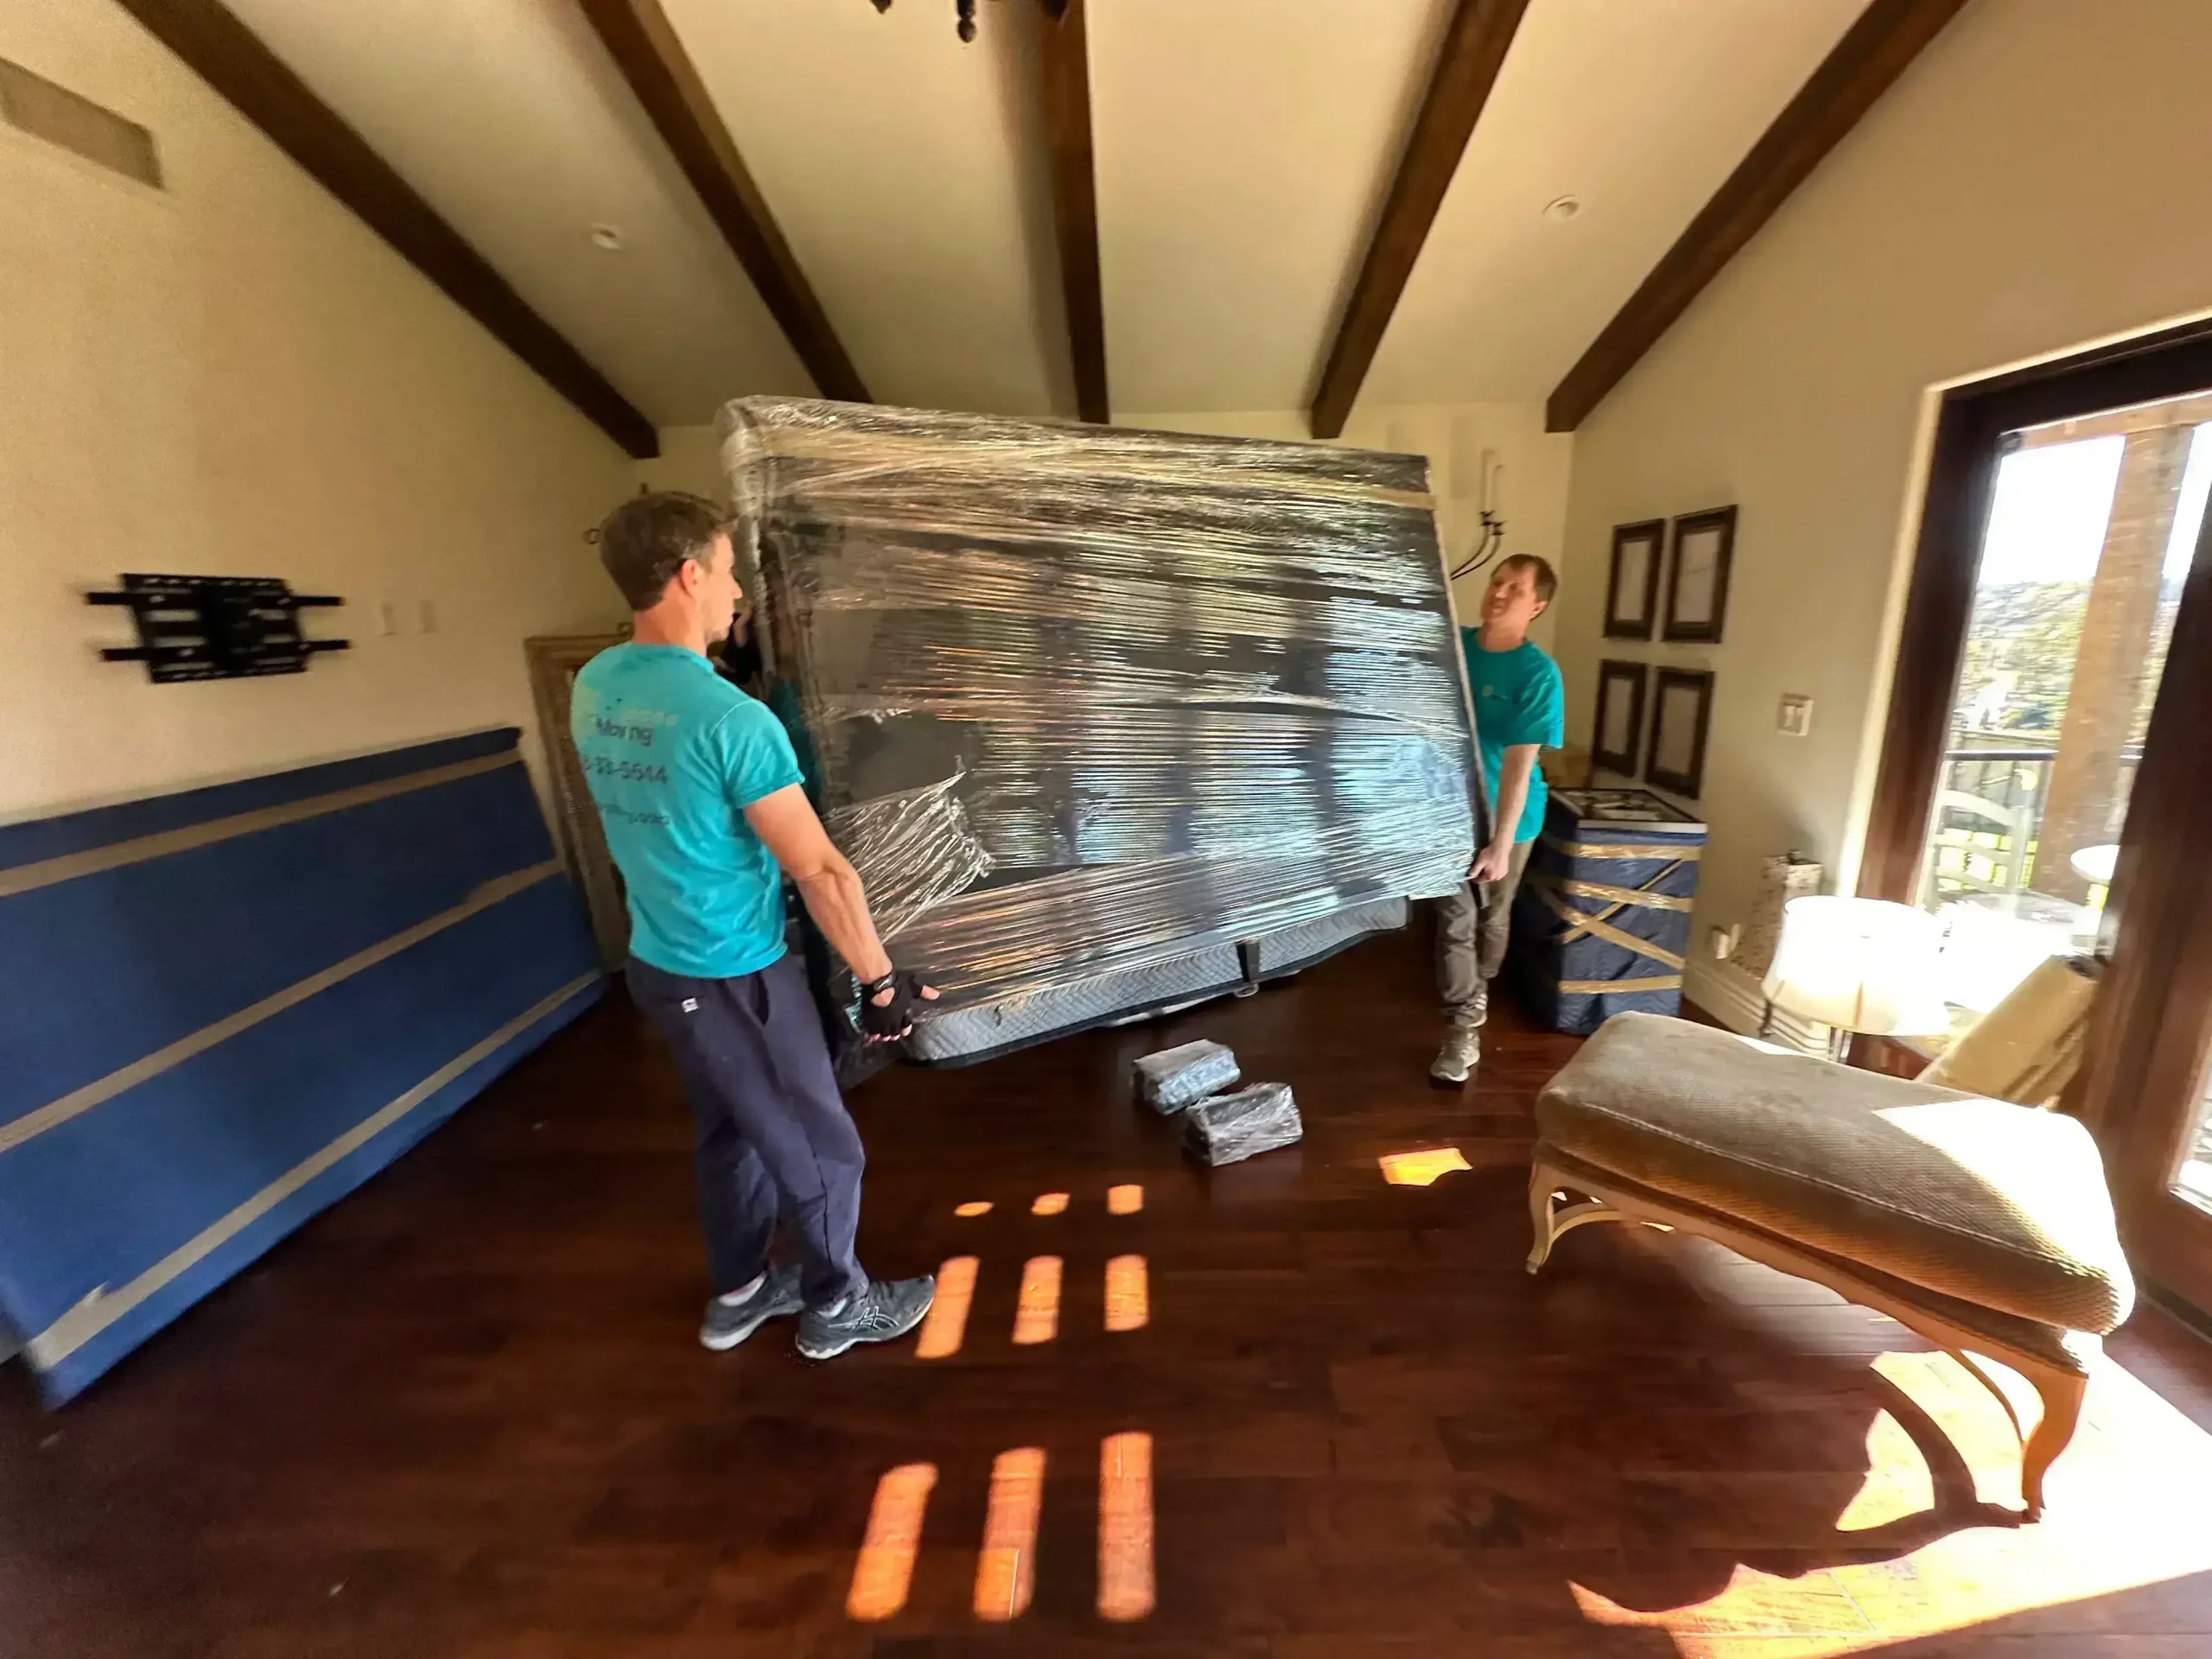 Moving Company San Diego: Fast & Reliable Services